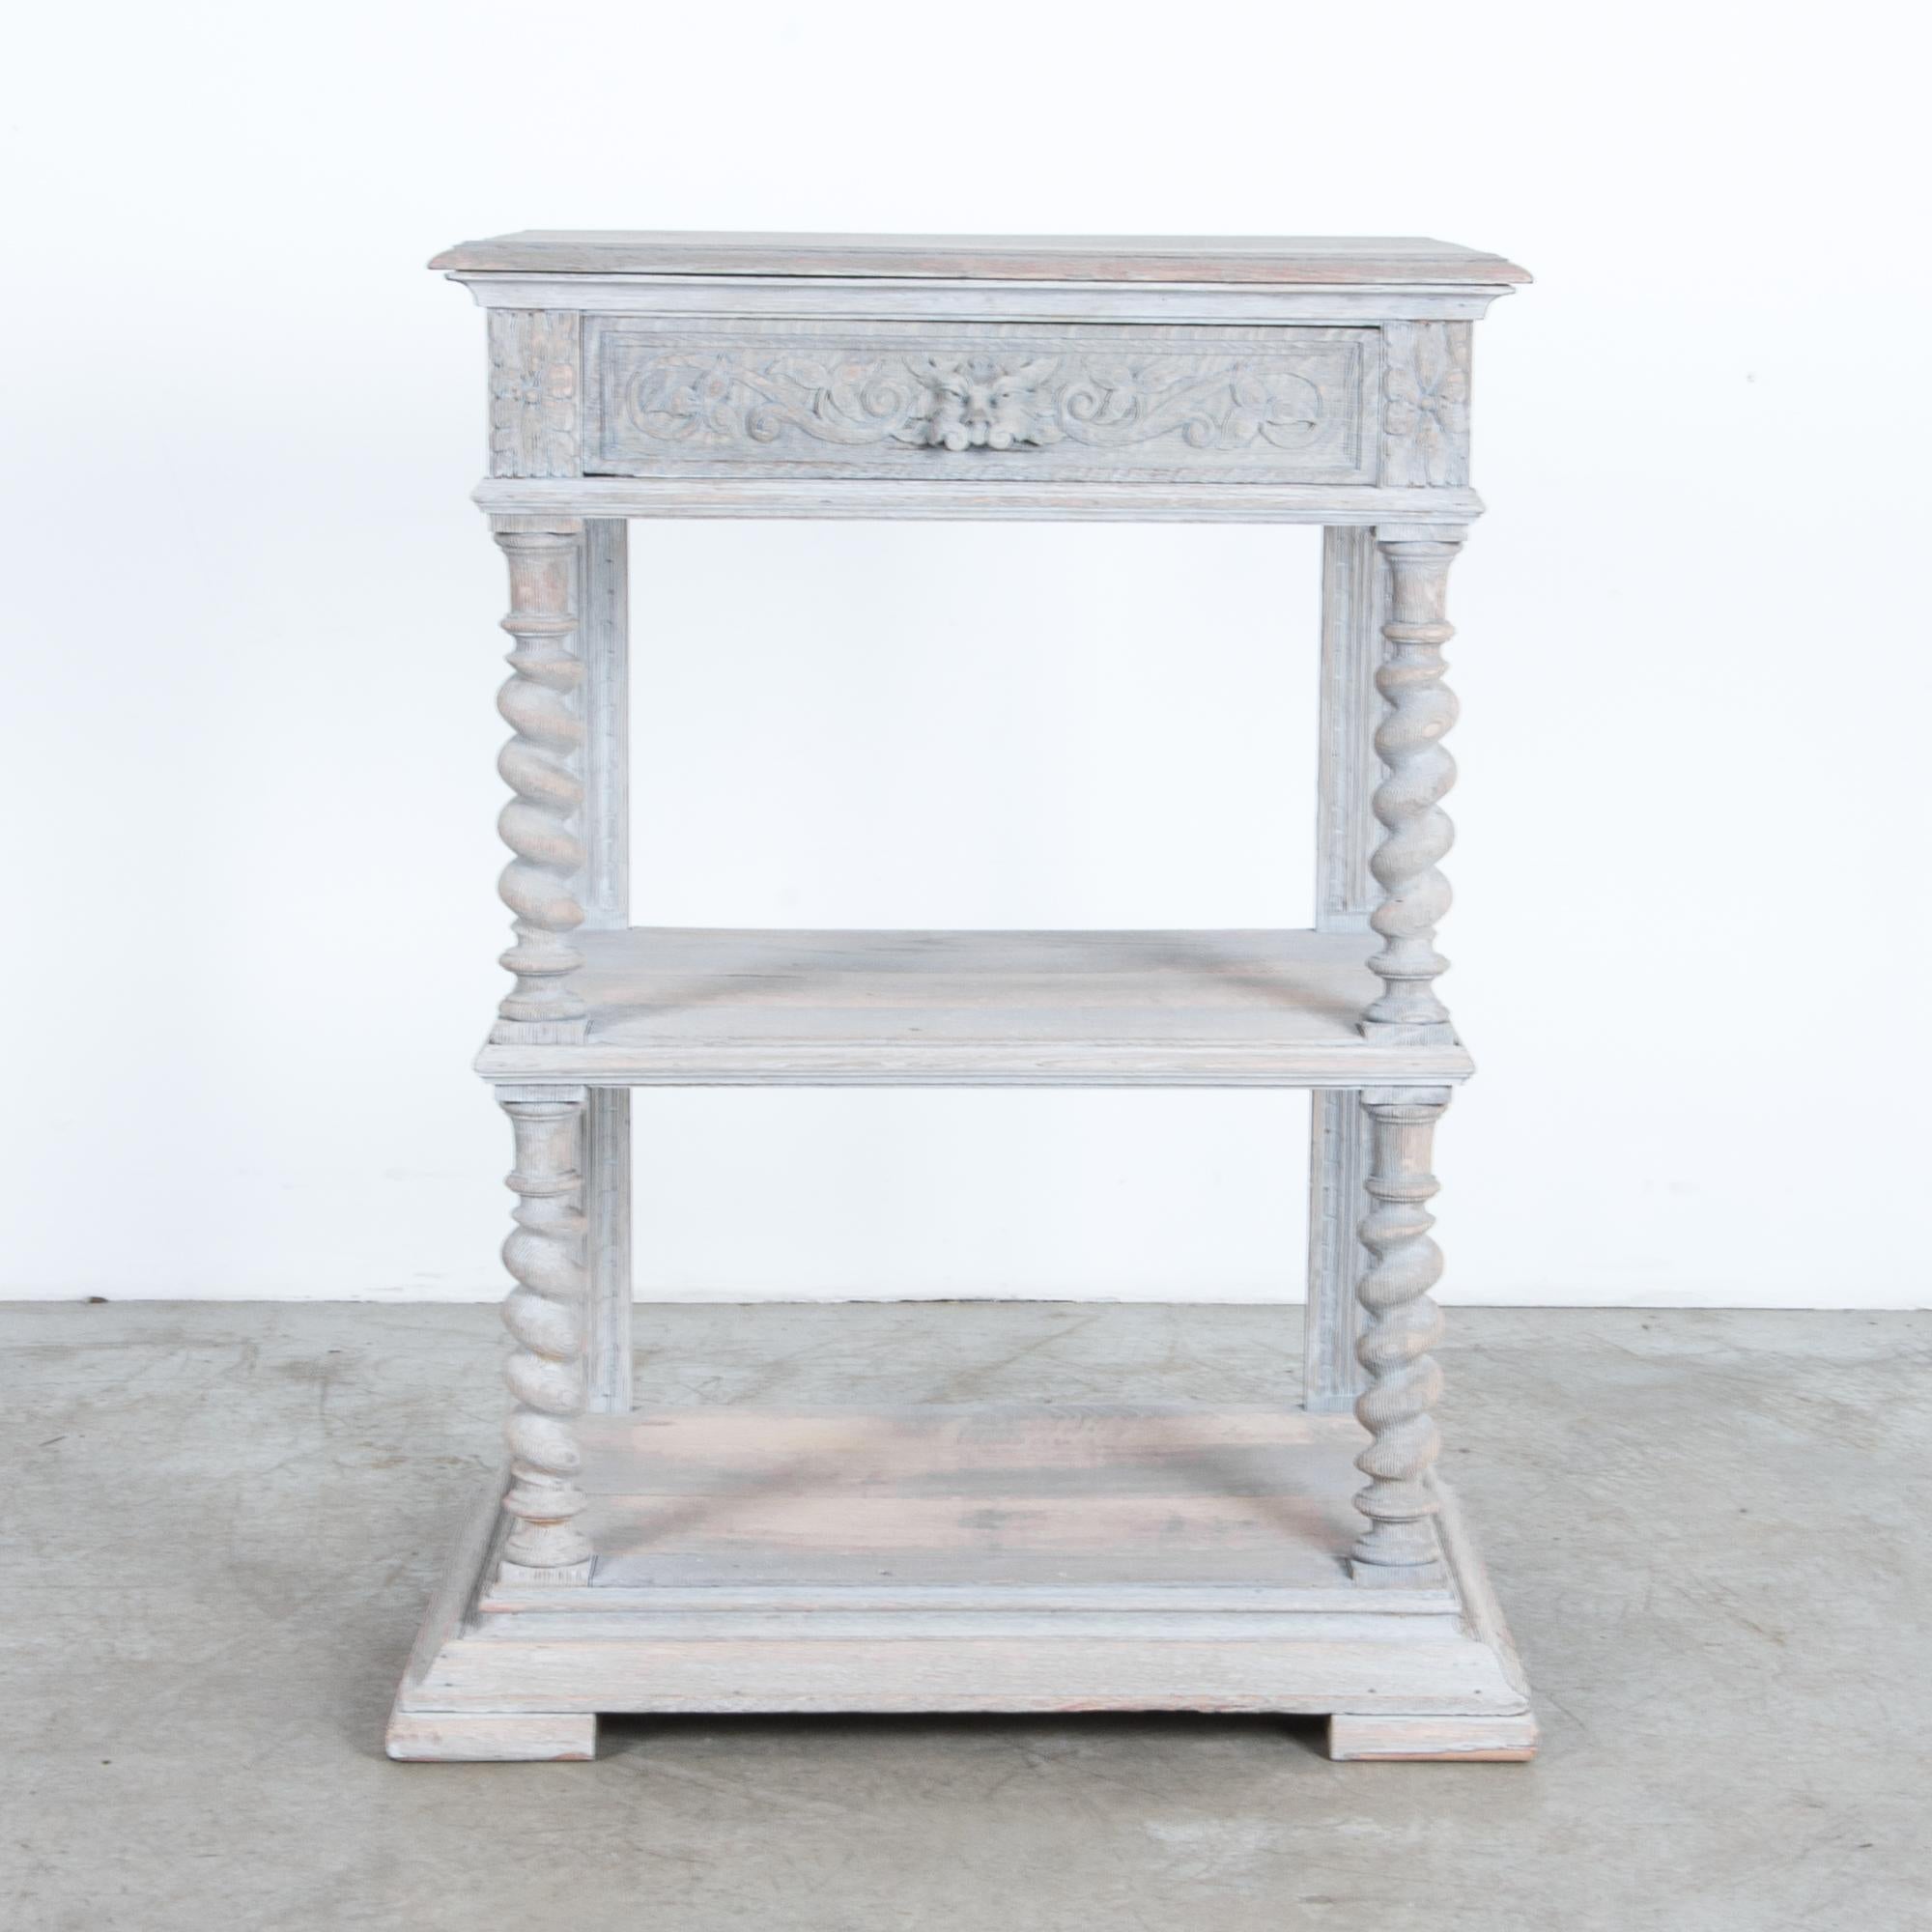 An oak console table with drawer and shelves from Belgium, circa 1900. A stabile design features a solid base, connected with columns to an upper shelf and tabletop, carved from durable hardwood and beautifully rendered in carved ornament,